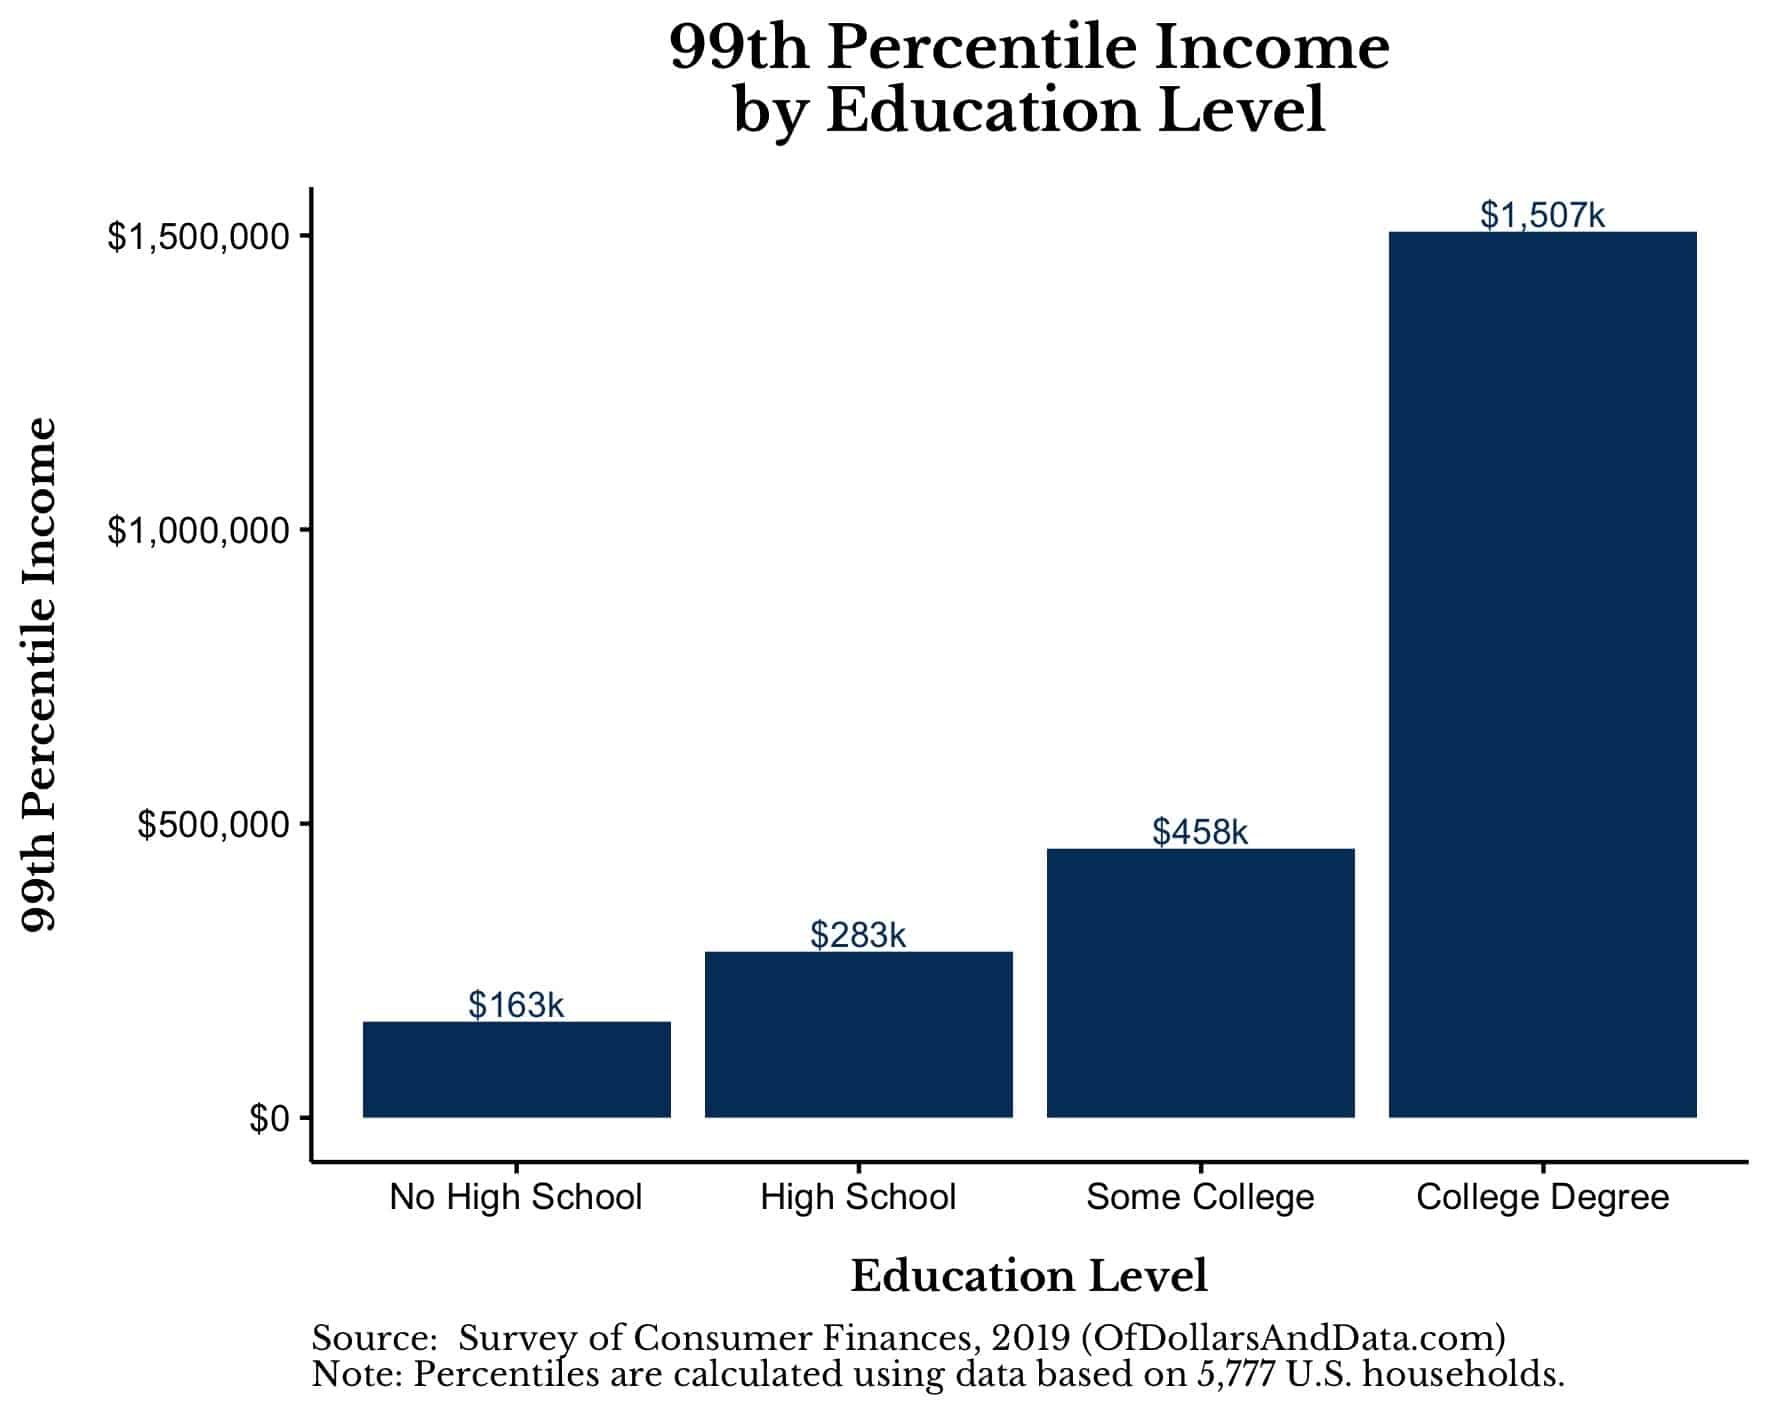 99th percentile household income by education level.